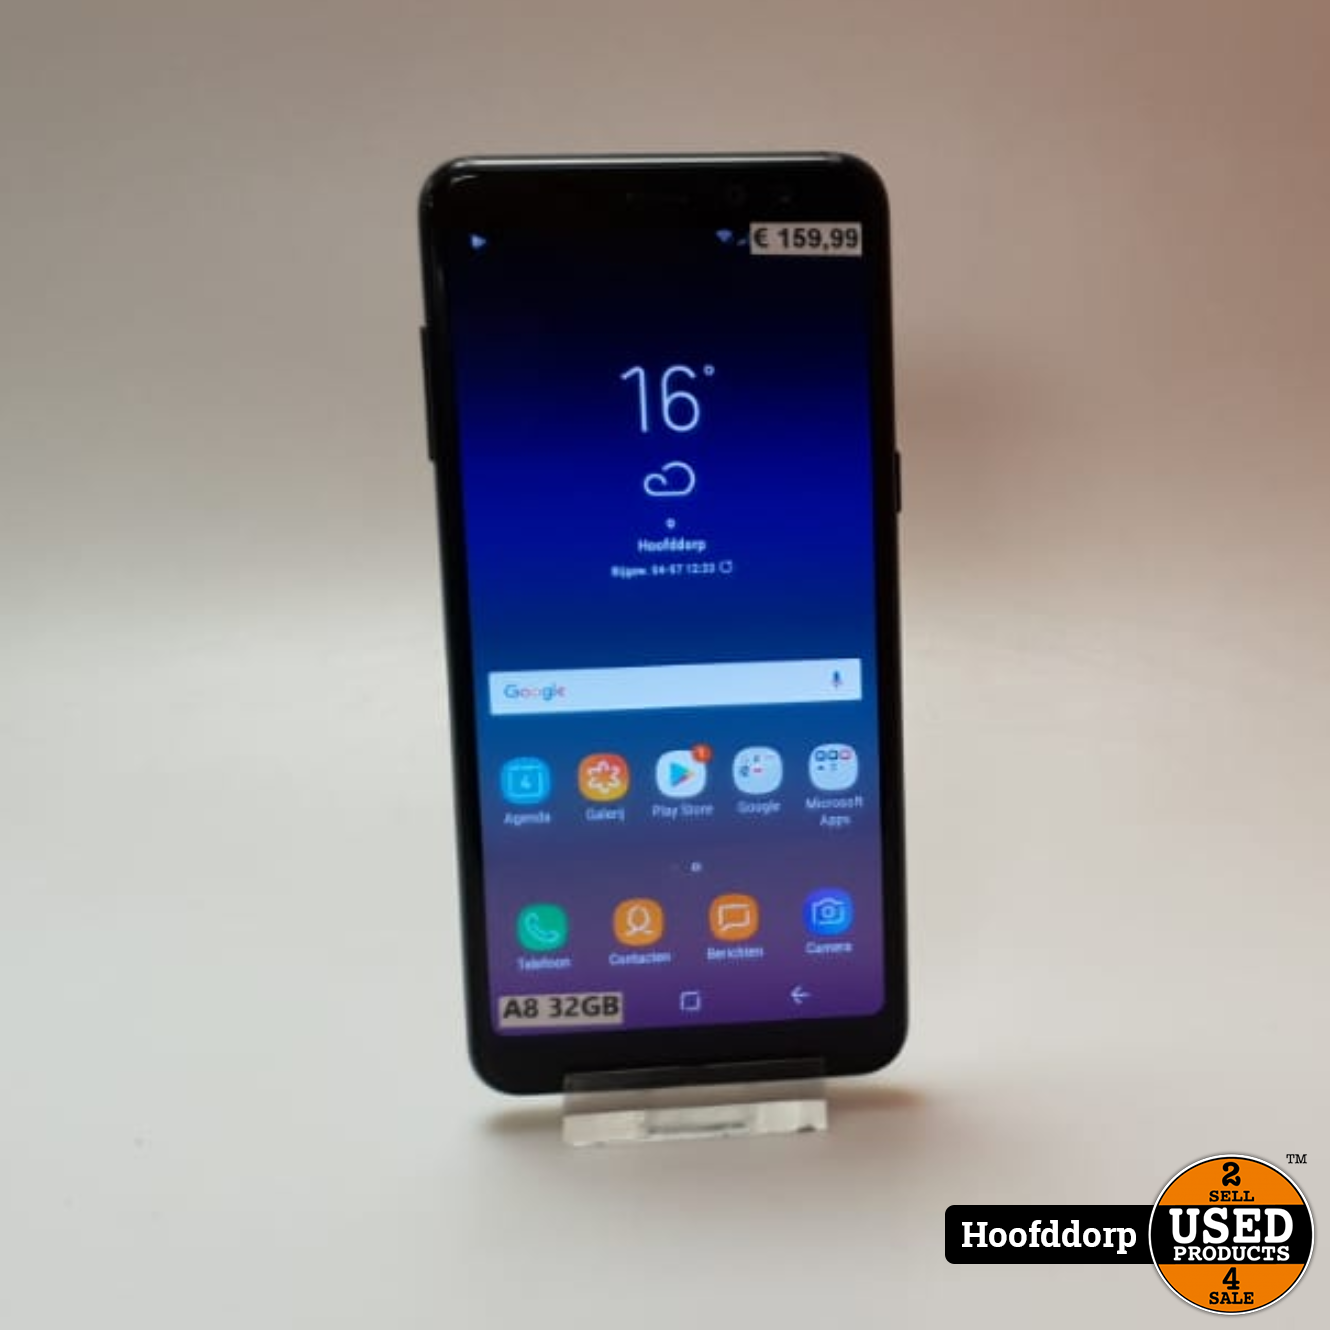 Fervent Levering streng Samsung Galaxy A8 2018 32GB Zwart DUOS - Used Products Hoofddorp